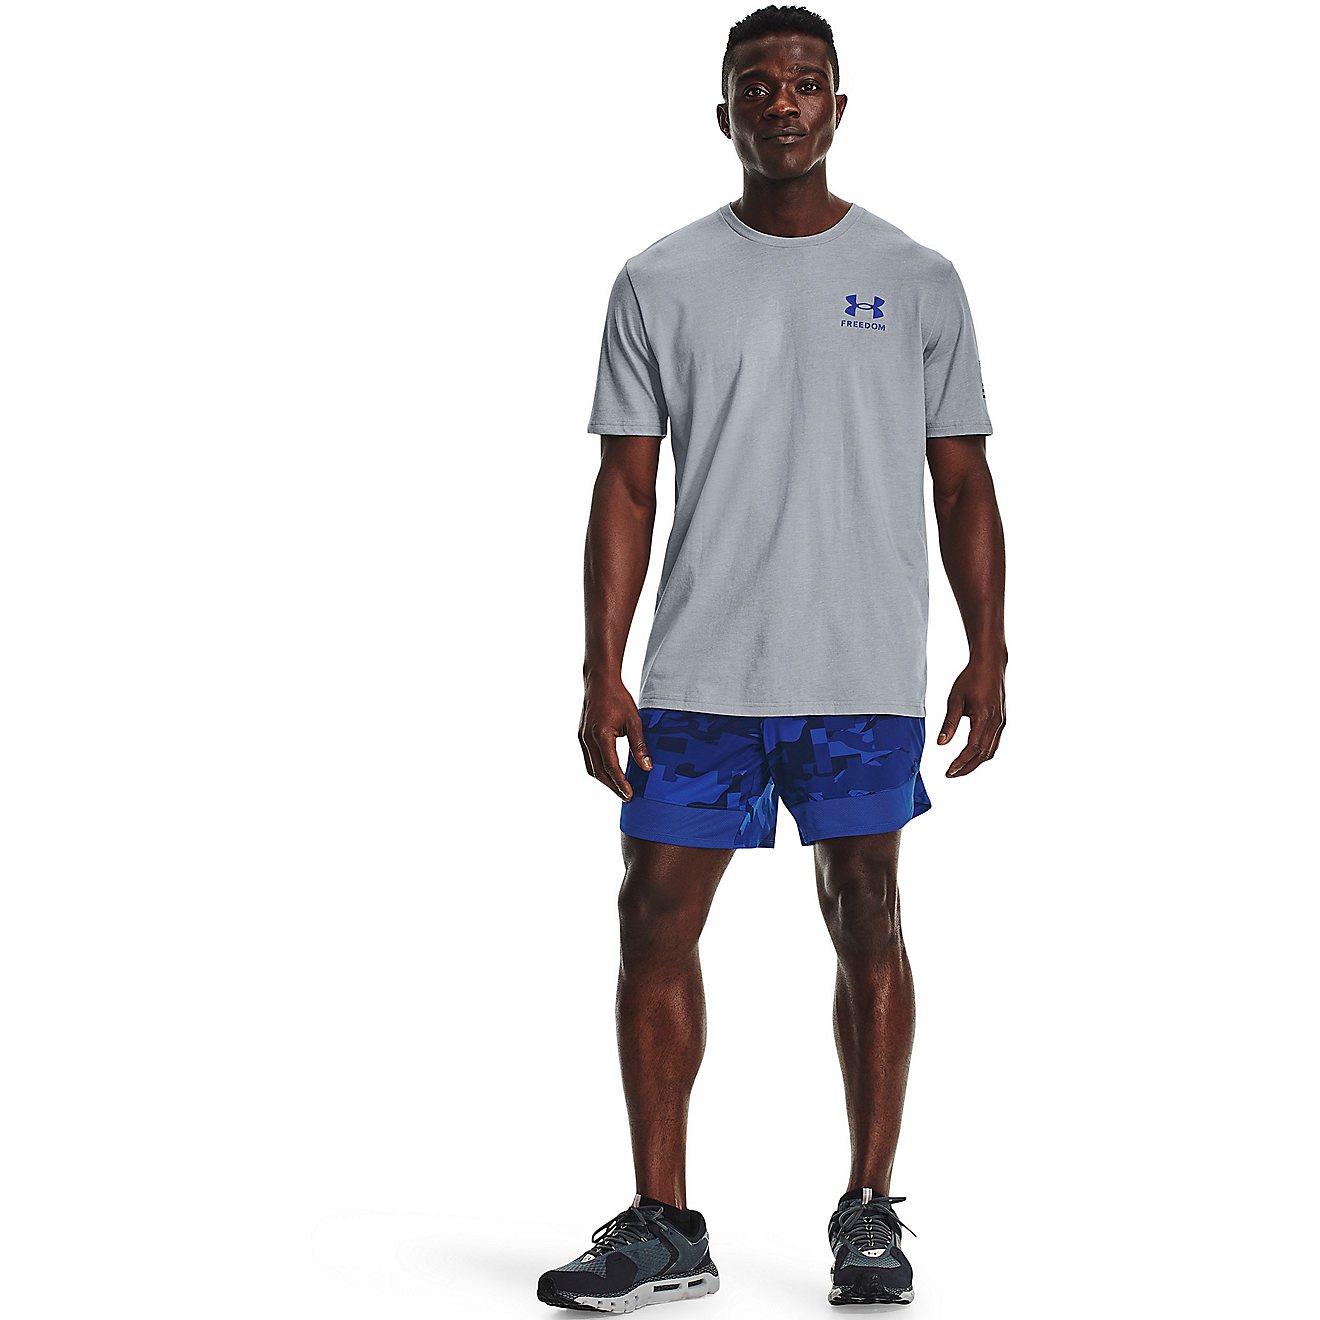 Under Armour Men's Freedom Flag Short Sleeve T-shirt                                                                             - view number 2